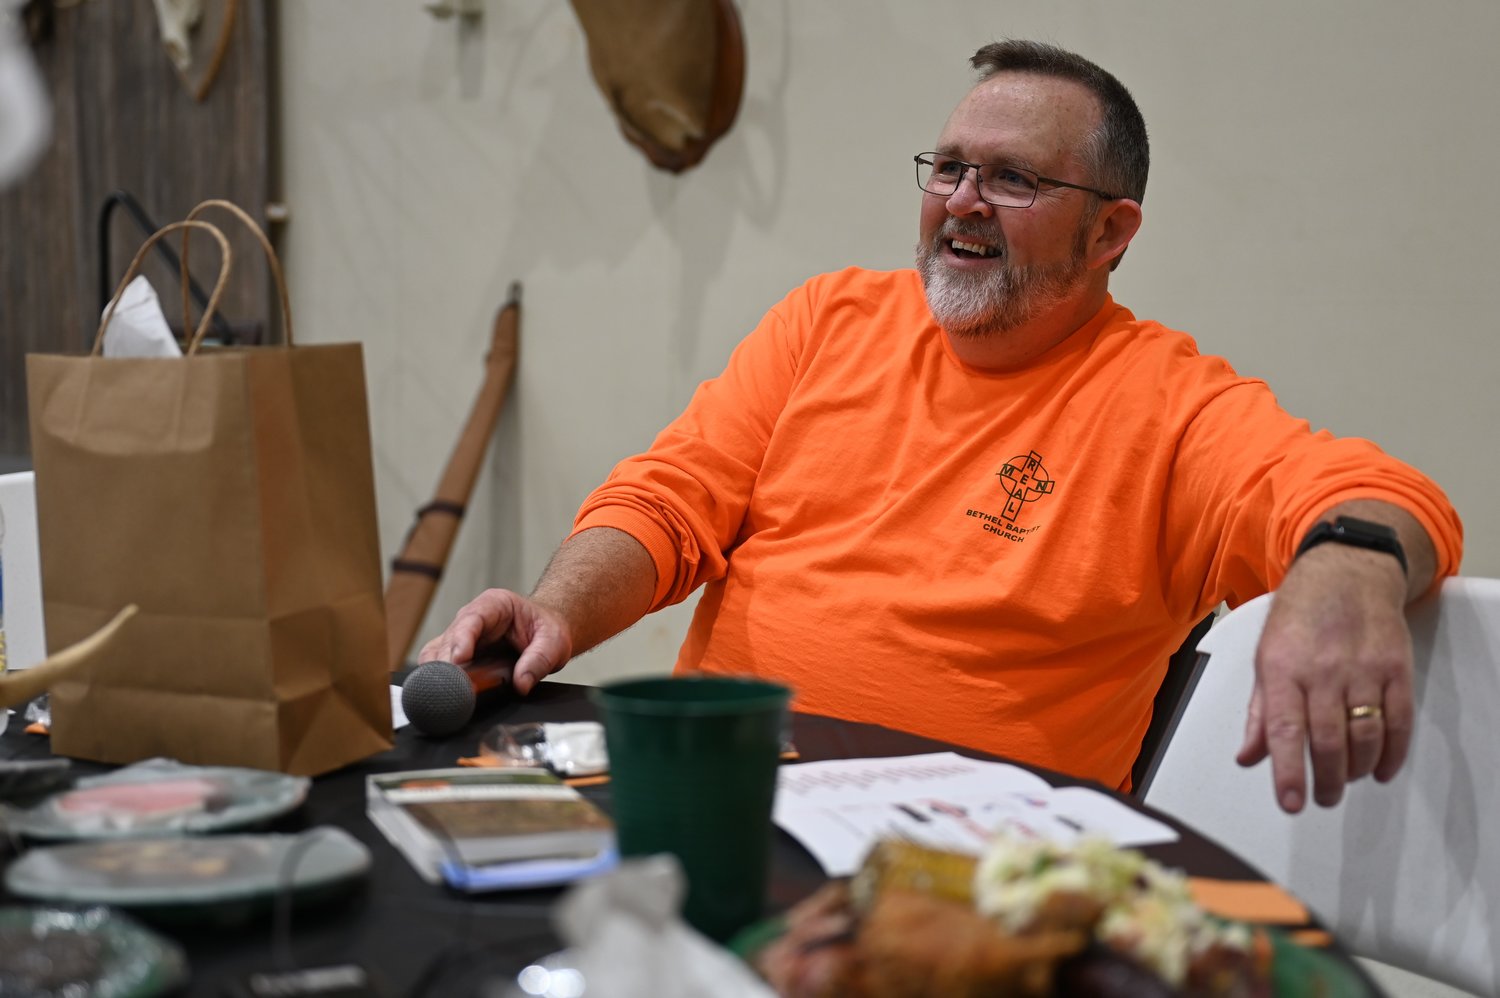 Bethel Baptist Church Pastor Troy Dykes takes a momentary break as a wild game dinner was getting underway on Friday, February 3, 2023. (Index/Roger Alford)